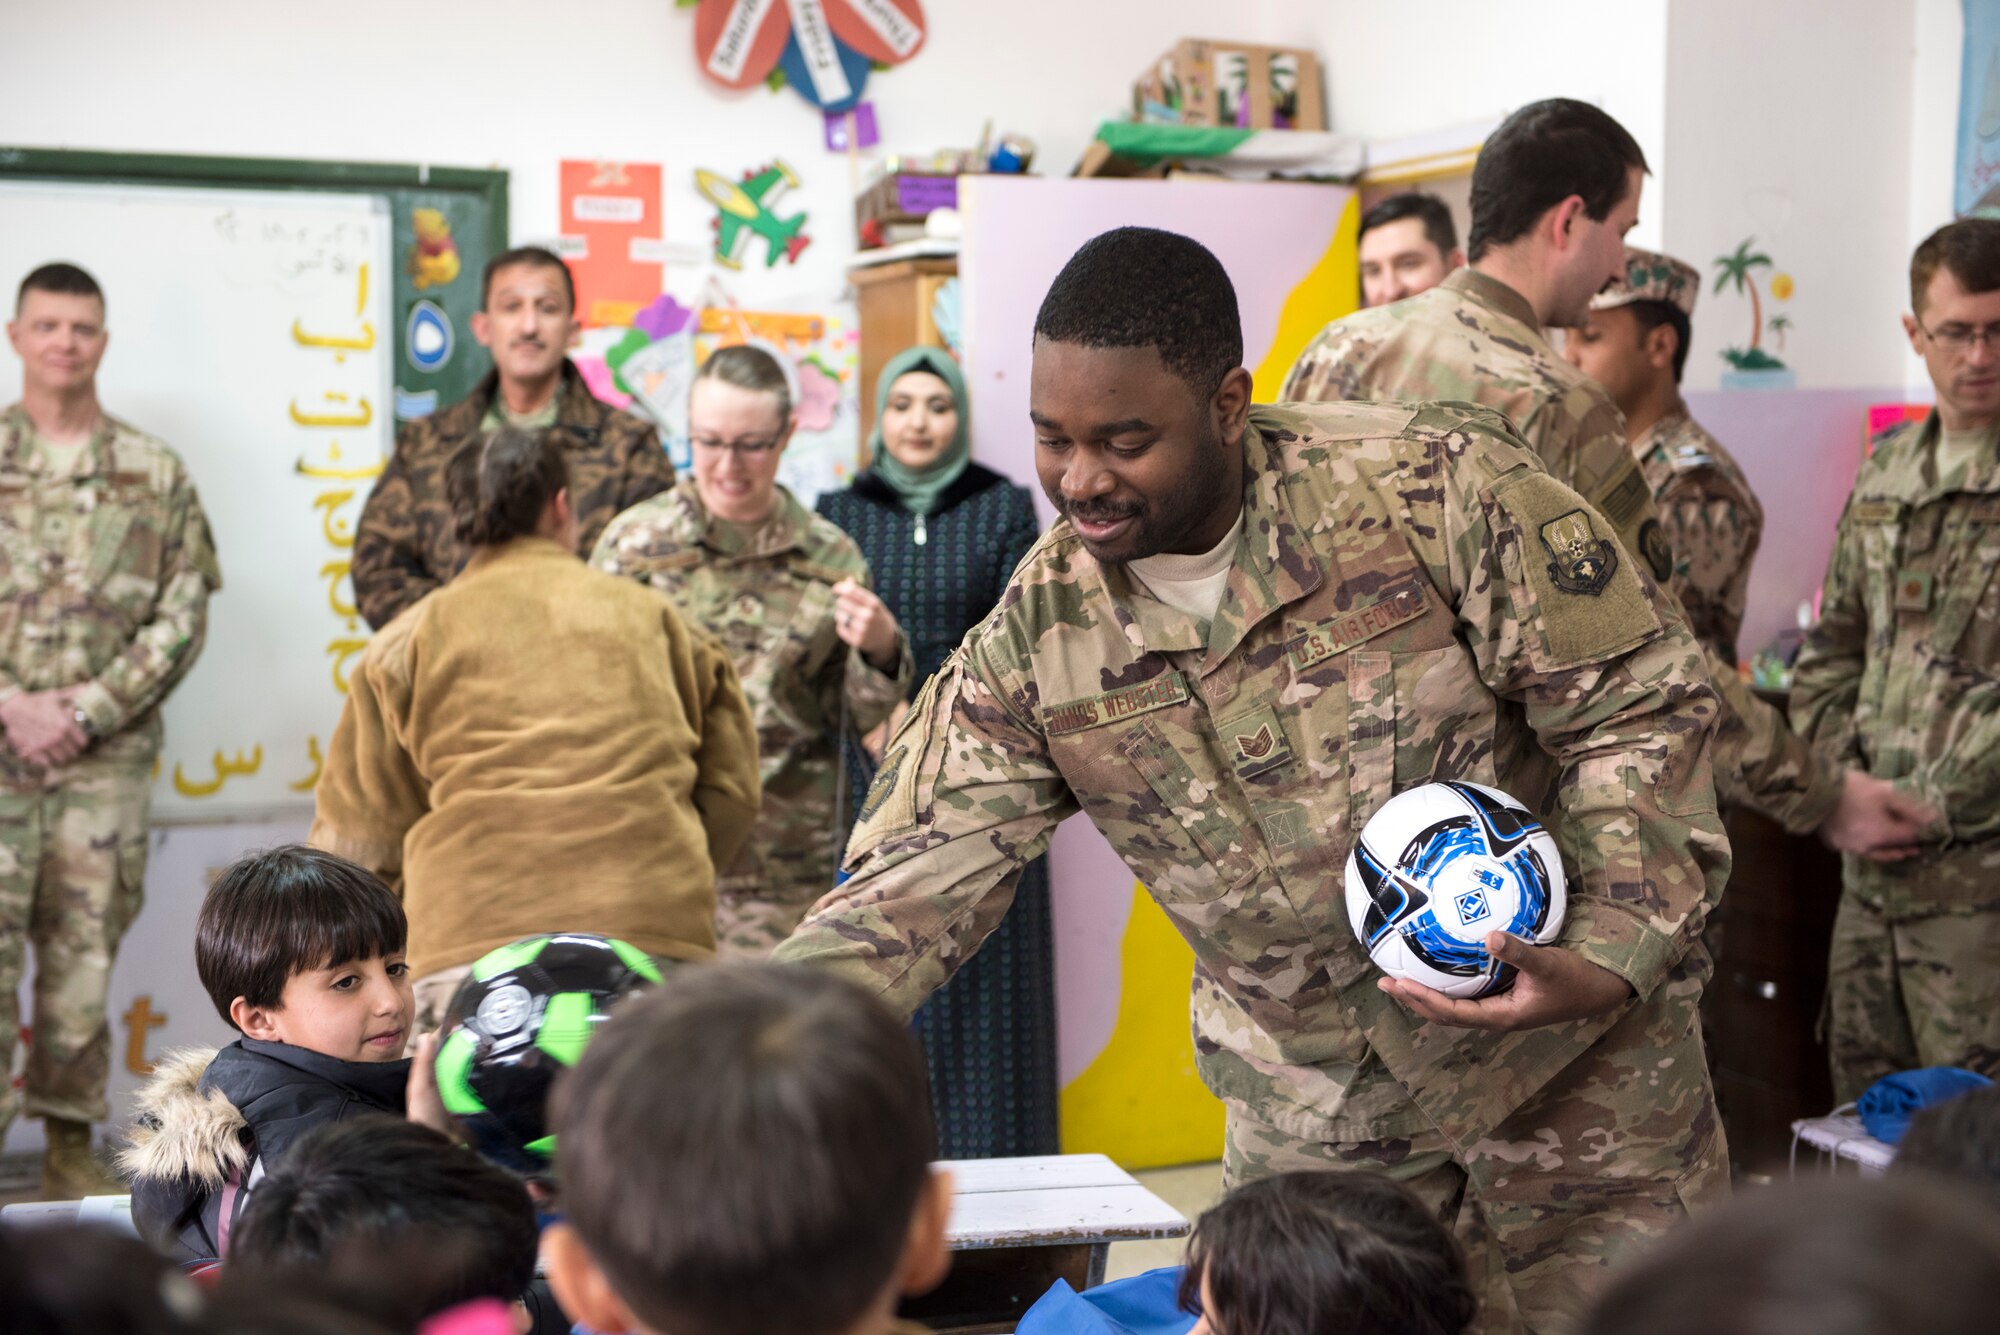 Tech. Sgt. Darren Hinds-Webster, assigned to the 332d Mission Support Group, hands out soccer balls to school children during a donation drop-off February 26, 2018, at an undisclosed location. Service members assigned to the 332d Air Expeditionary Wing had been gathering supplies for more than three months. (U.S. Air Force photo by Staff Sgt. Joshua Kleinholz)